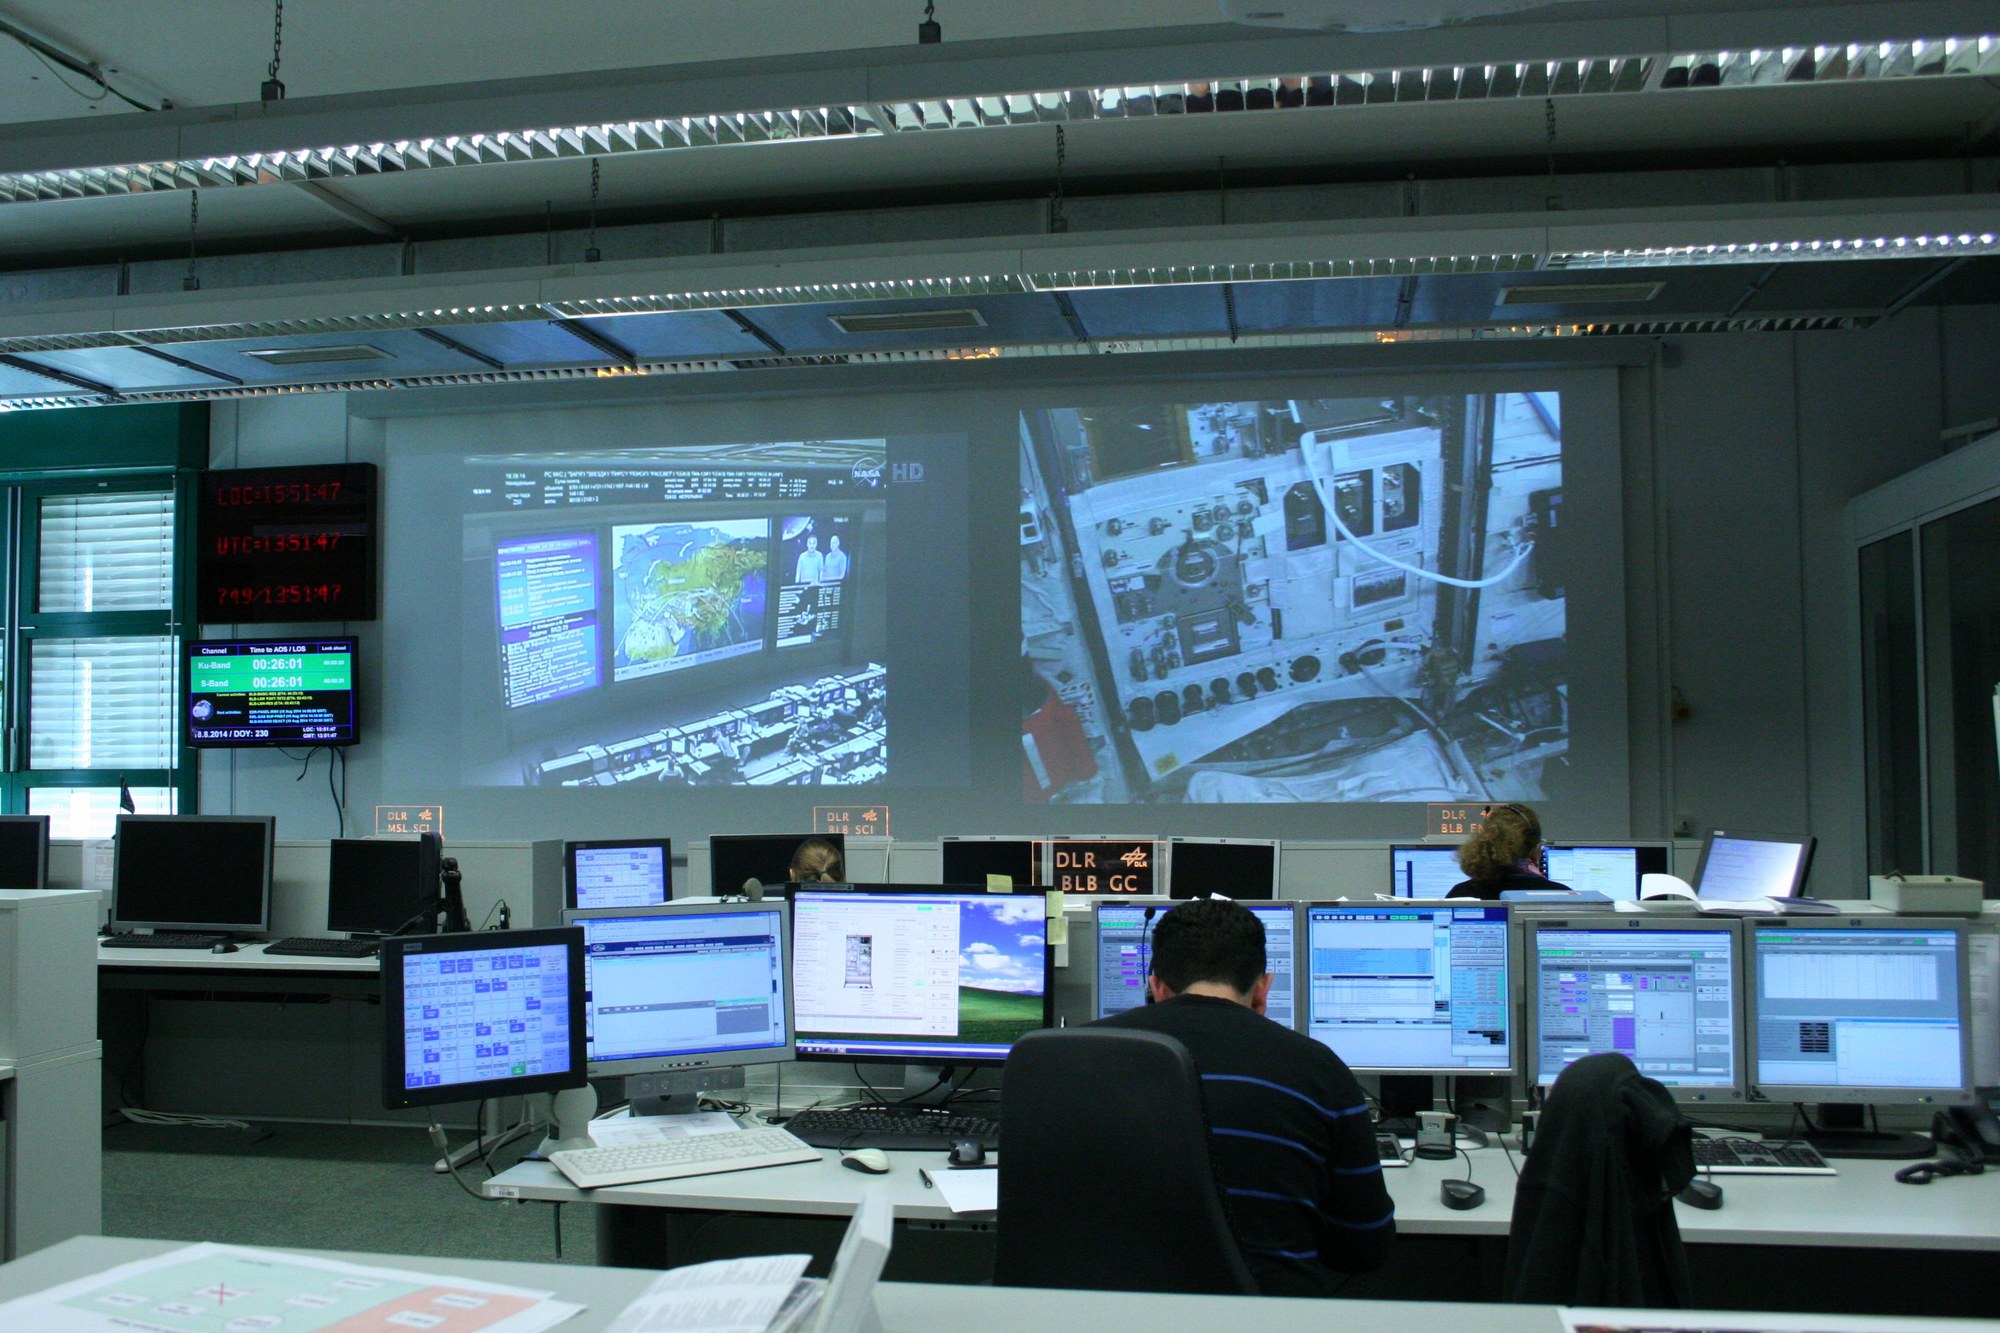 International Space Station (ISS) experiments operated from the Large Control Room